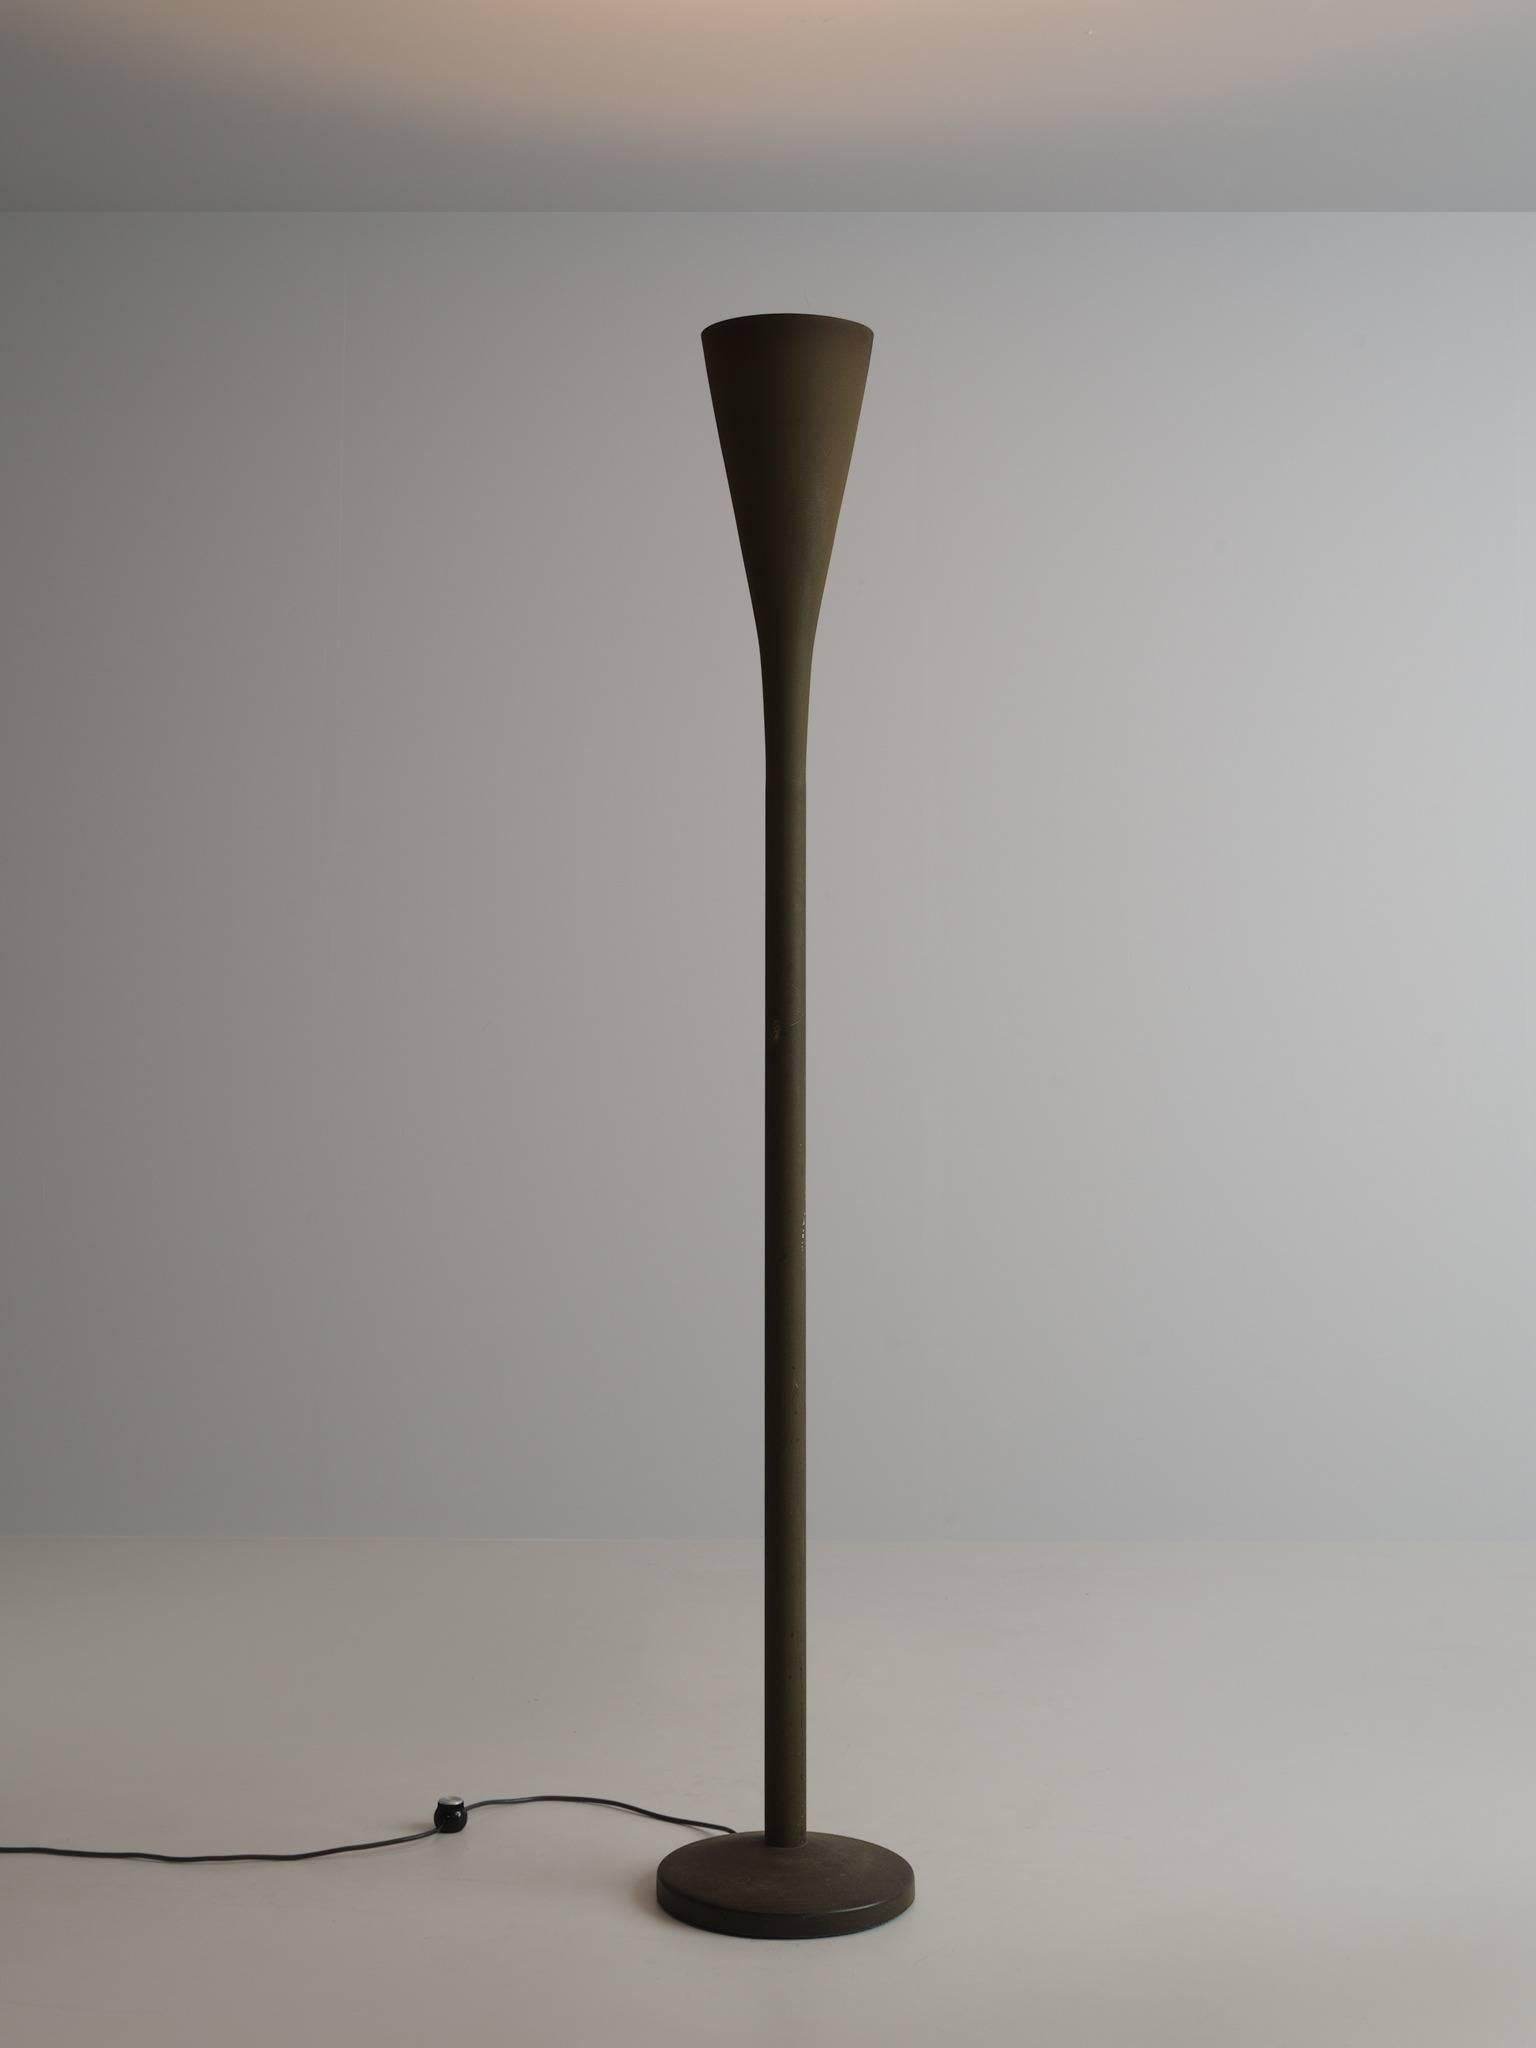 Pietro Chiesa for Fontana Arte, 'Luminator' floor lamp, aluminium, Italy, designed in 1933.

This 'Luminator' floor lamp is designed by Pietro Chiesa and executed by Fontana Arte. This lamp has a very contemporary, sleek feel and it is therefore